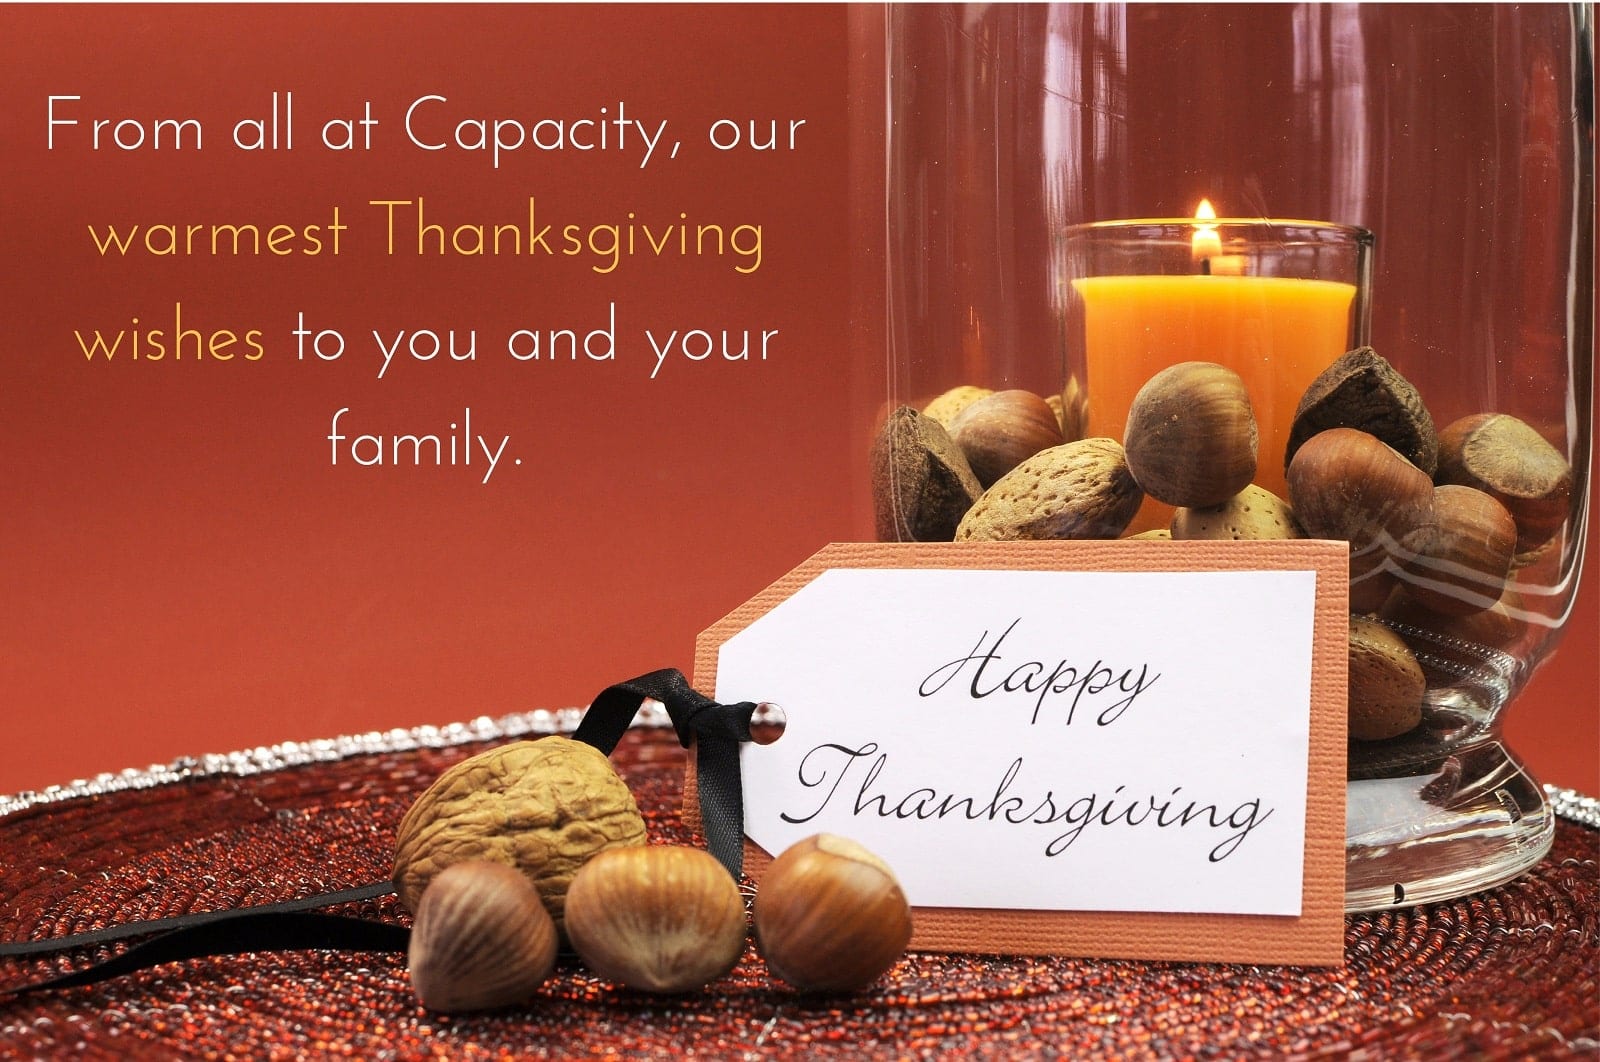 Happy Thanksgiving from Capacity